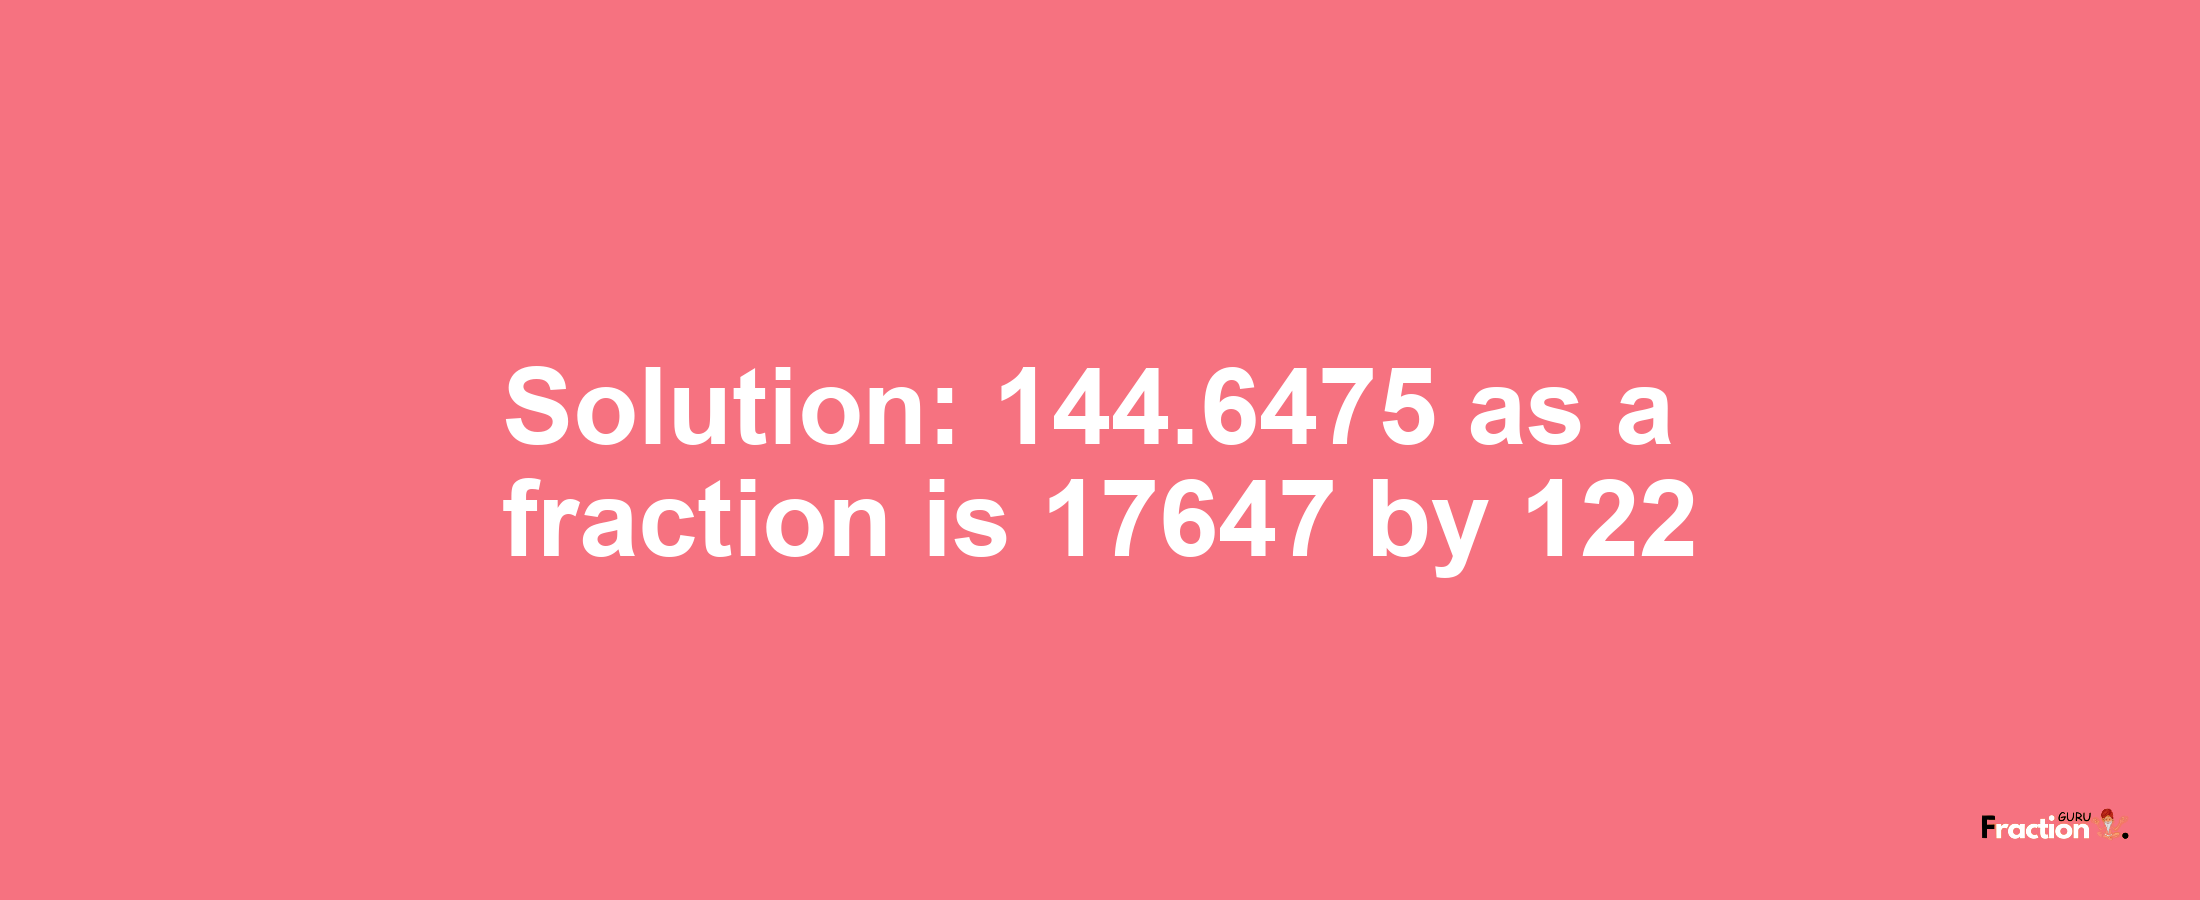 Solution:144.6475 as a fraction is 17647/122